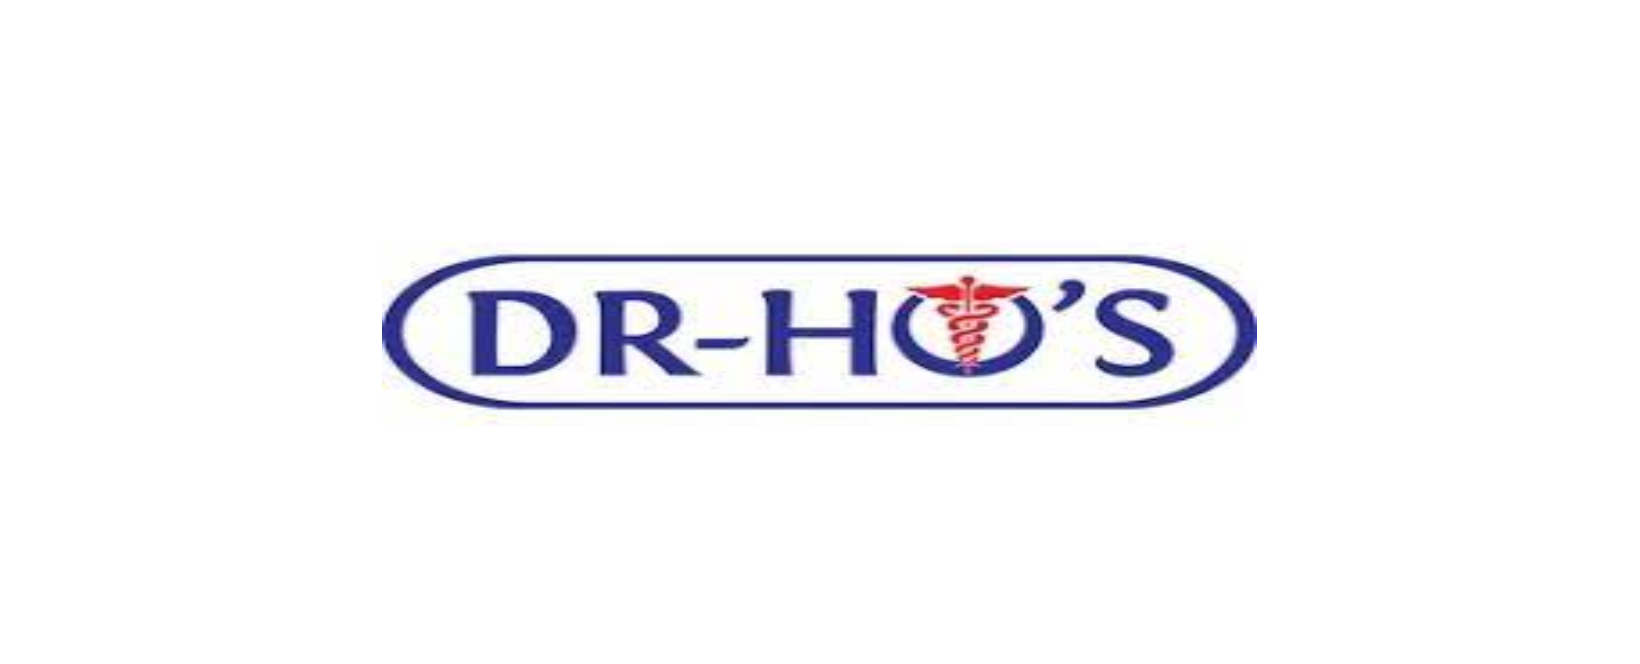 DR-HO'S Discount Code 2022